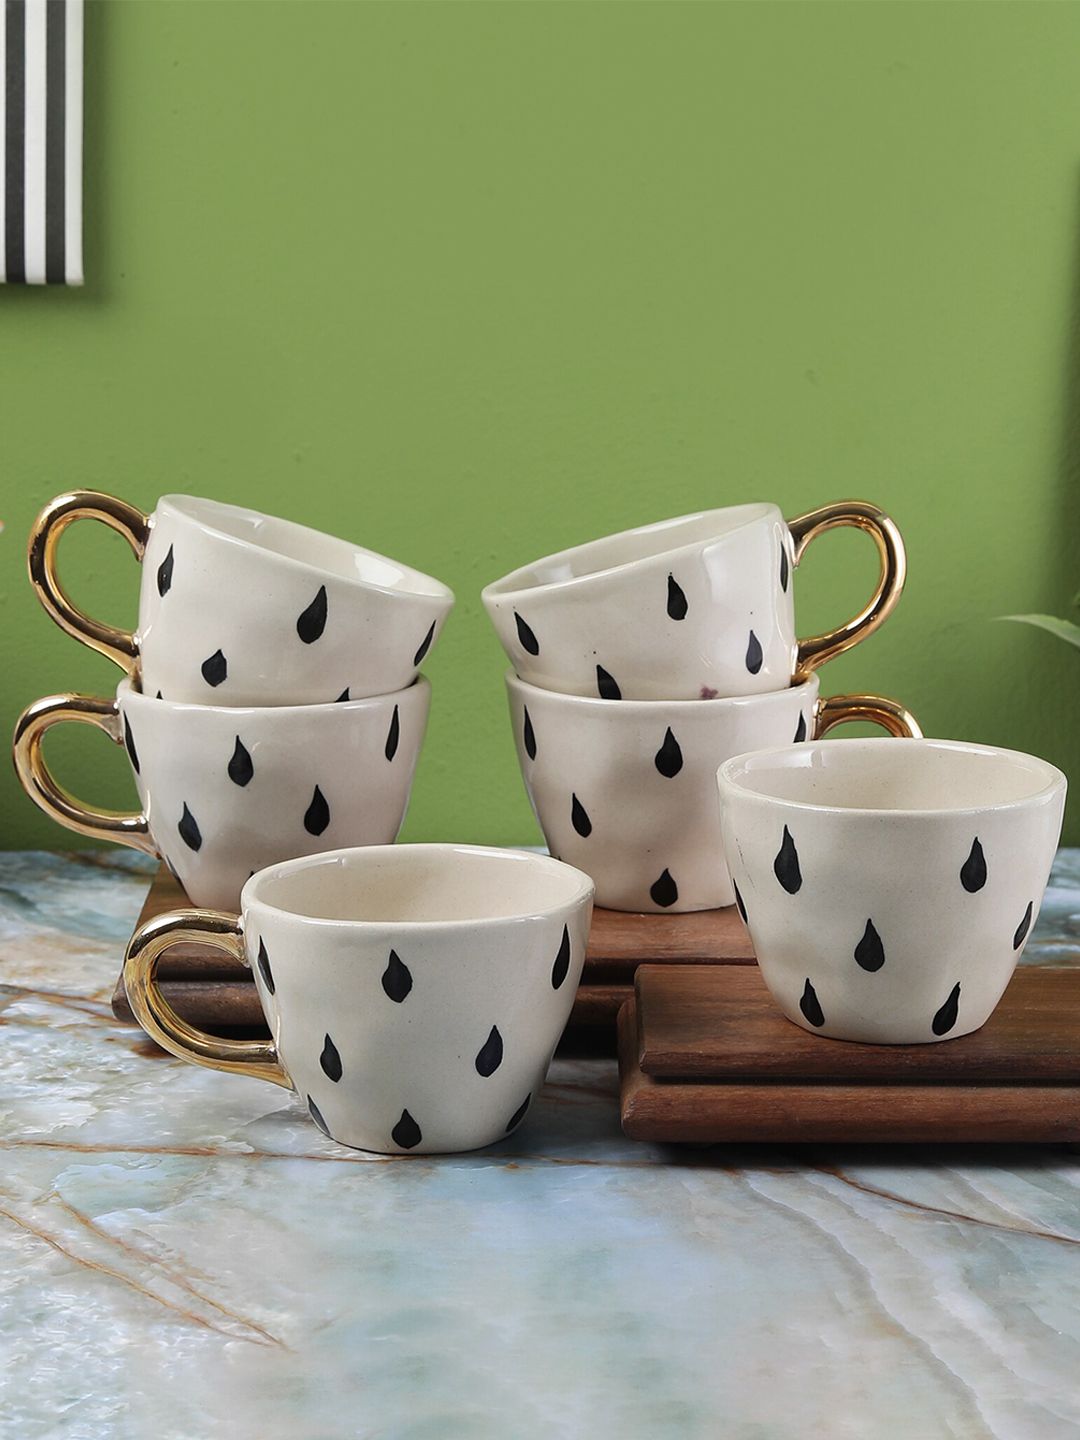 The Decor Mart Set Of 6 White & Black Printed Ceramic Glossy Cups Price in India